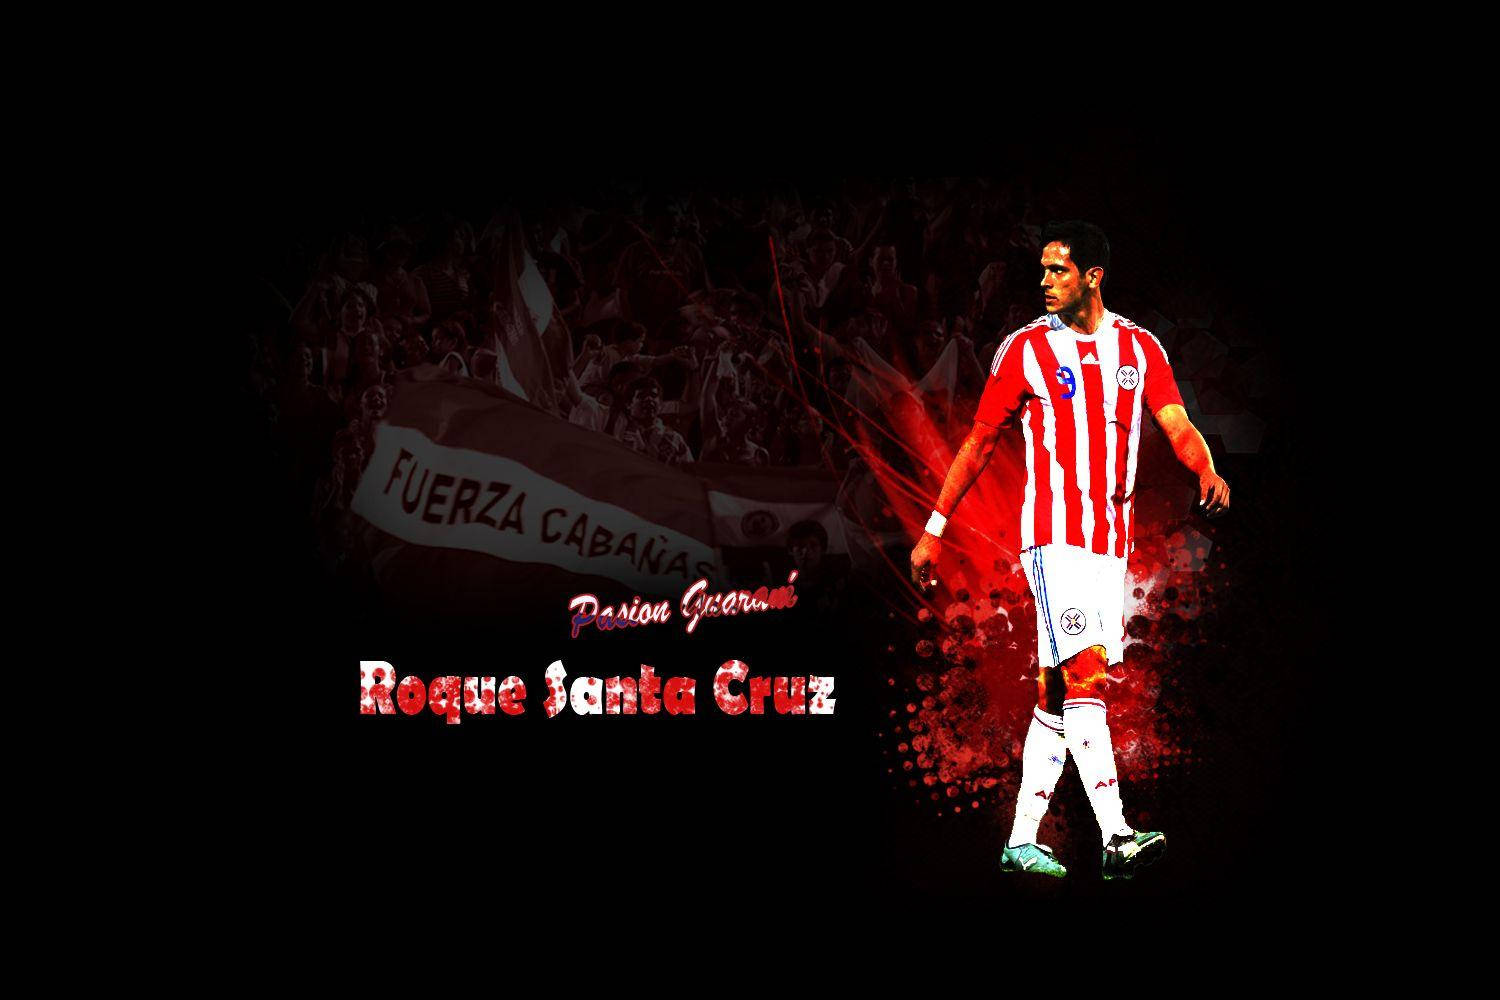 Paraguay Soccer Player Roque Background